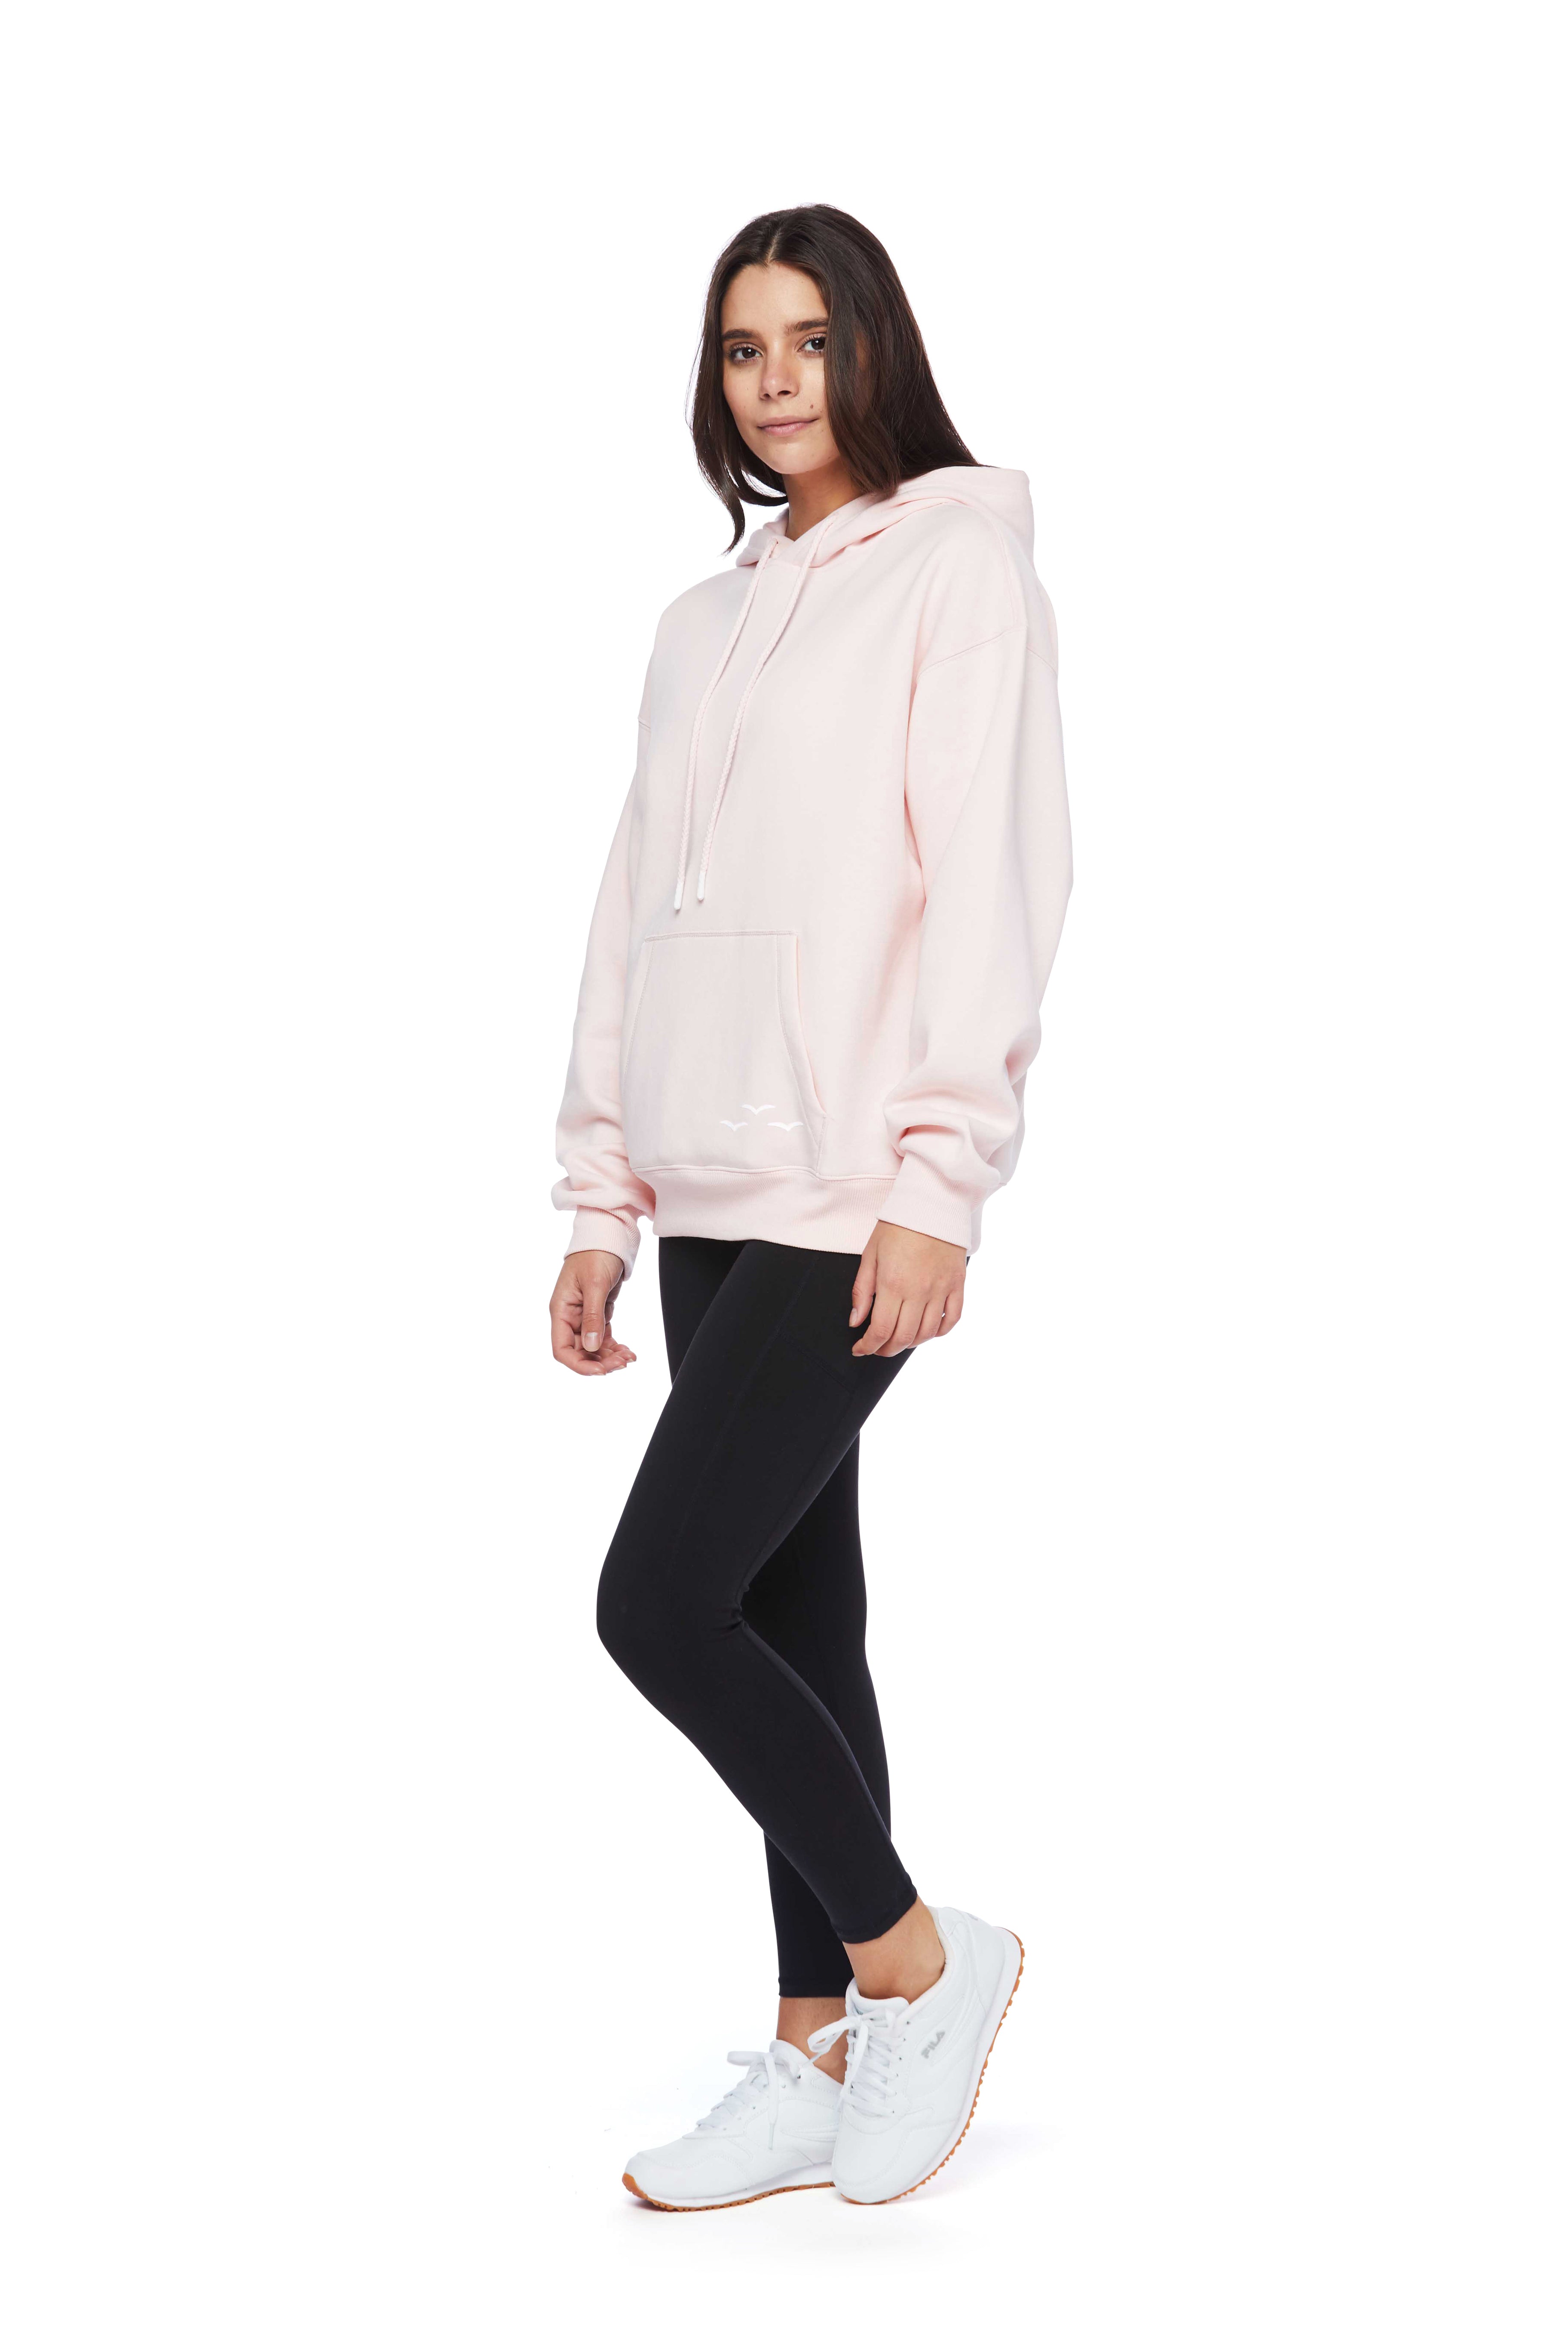 Chloe Relaxed Fit Hoodie in Petal Pink from Lazypants - always a great buy at a reasonable price.